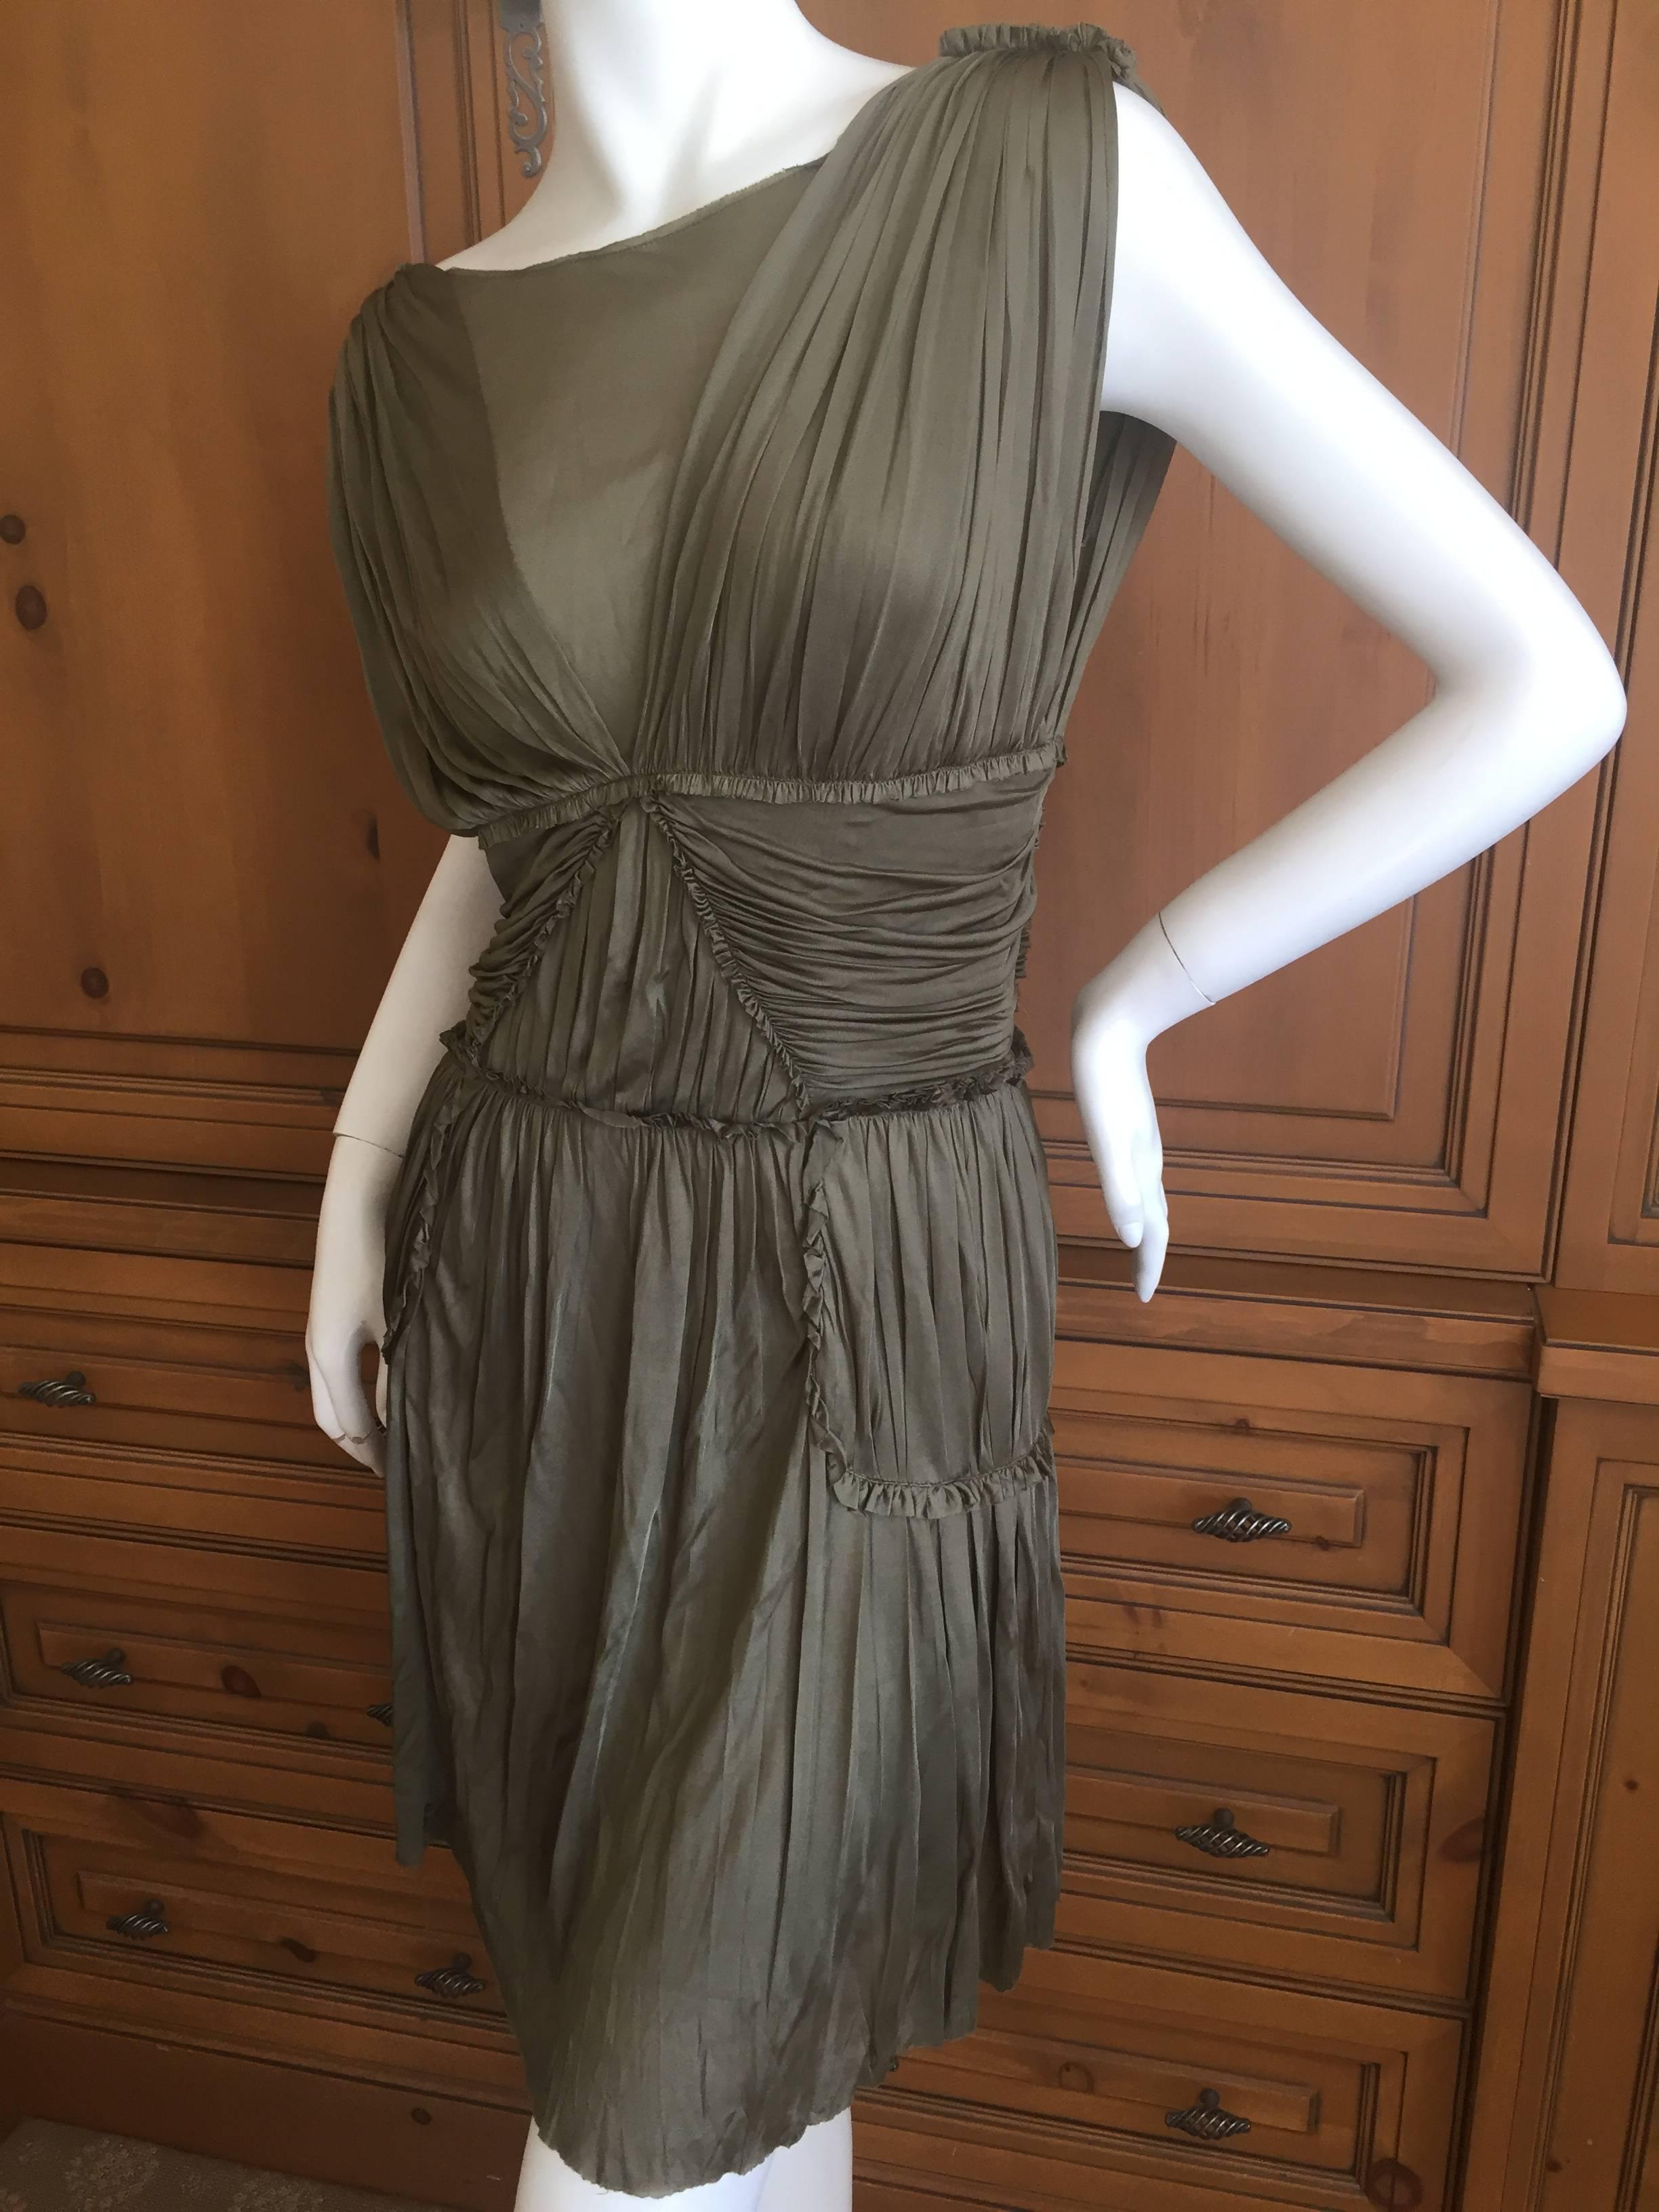 Alexander McQueen Green Draped Goddess Mini Dress McQ Fall 2010 In Good Condition For Sale In Cloverdale, CA